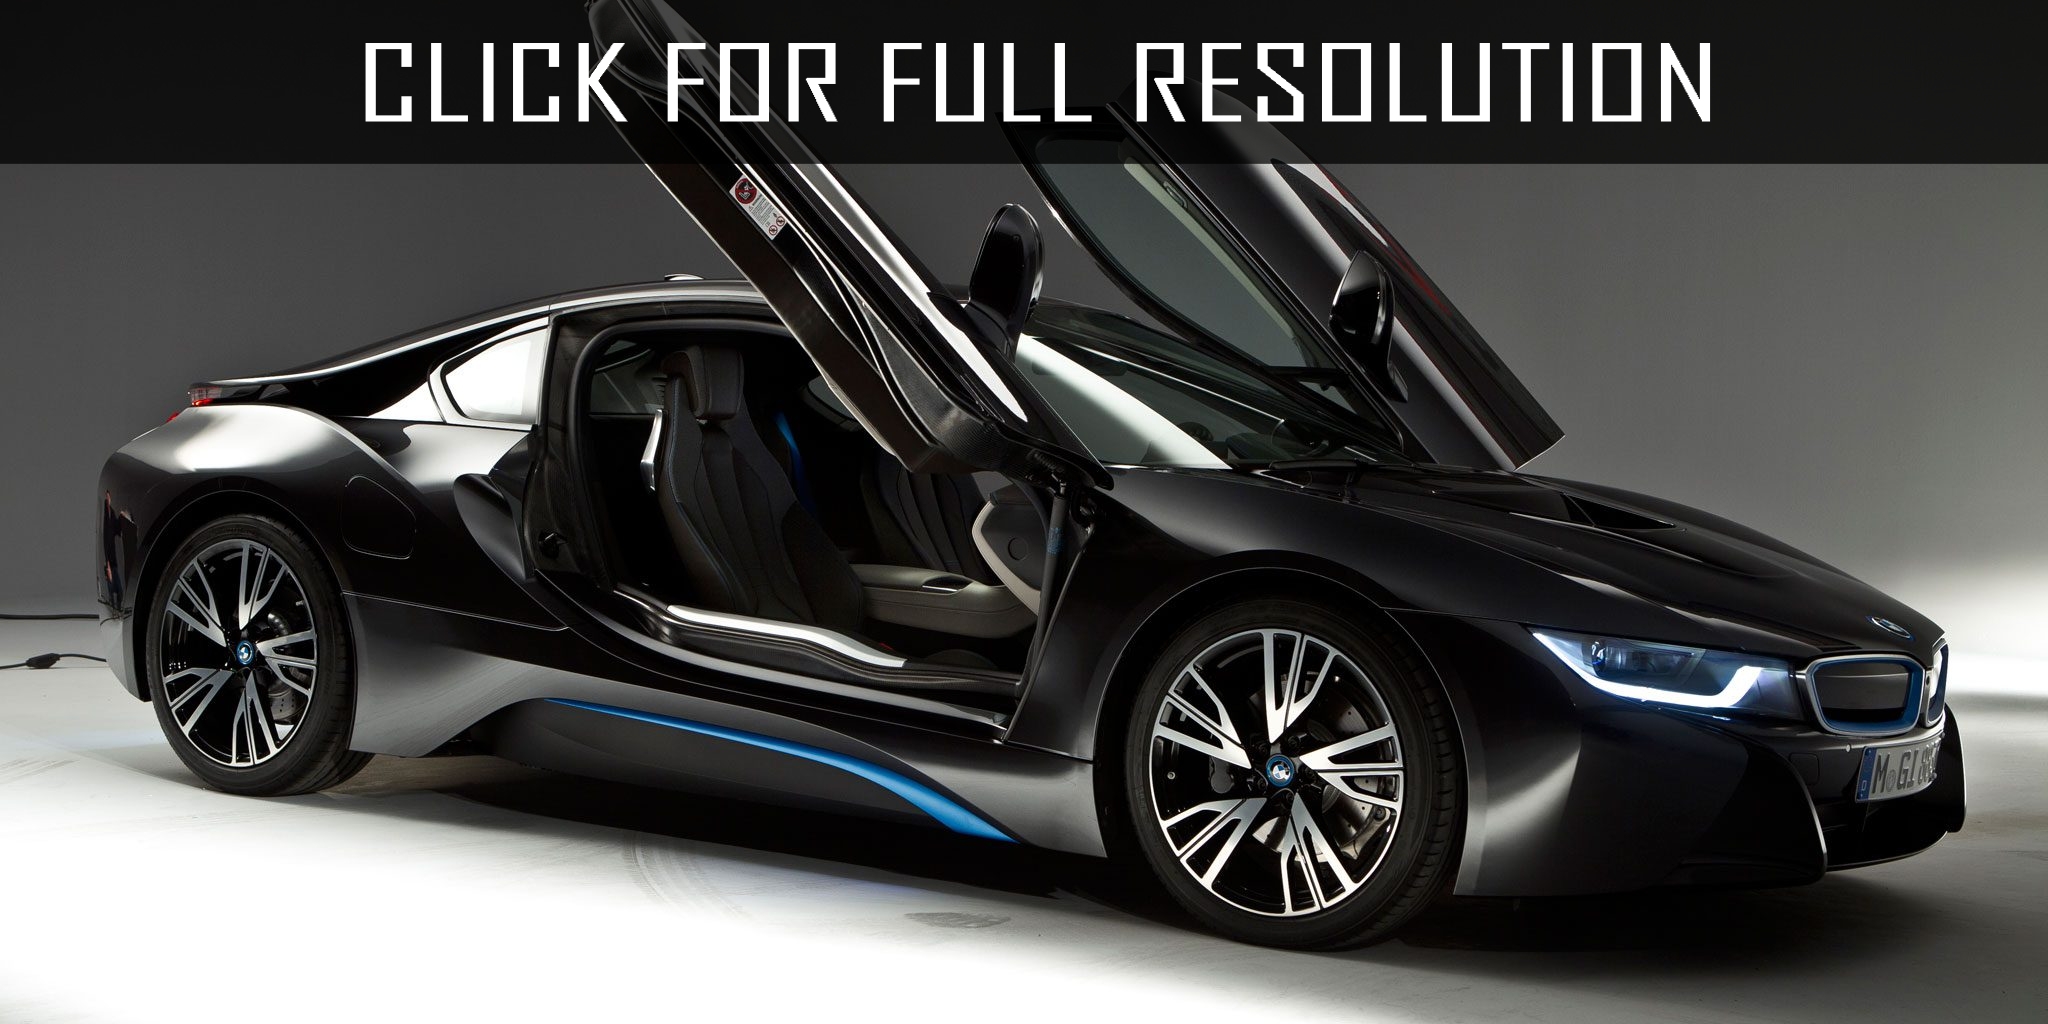 Bmw I8 Electric Car  amazing photo gallery, some information and